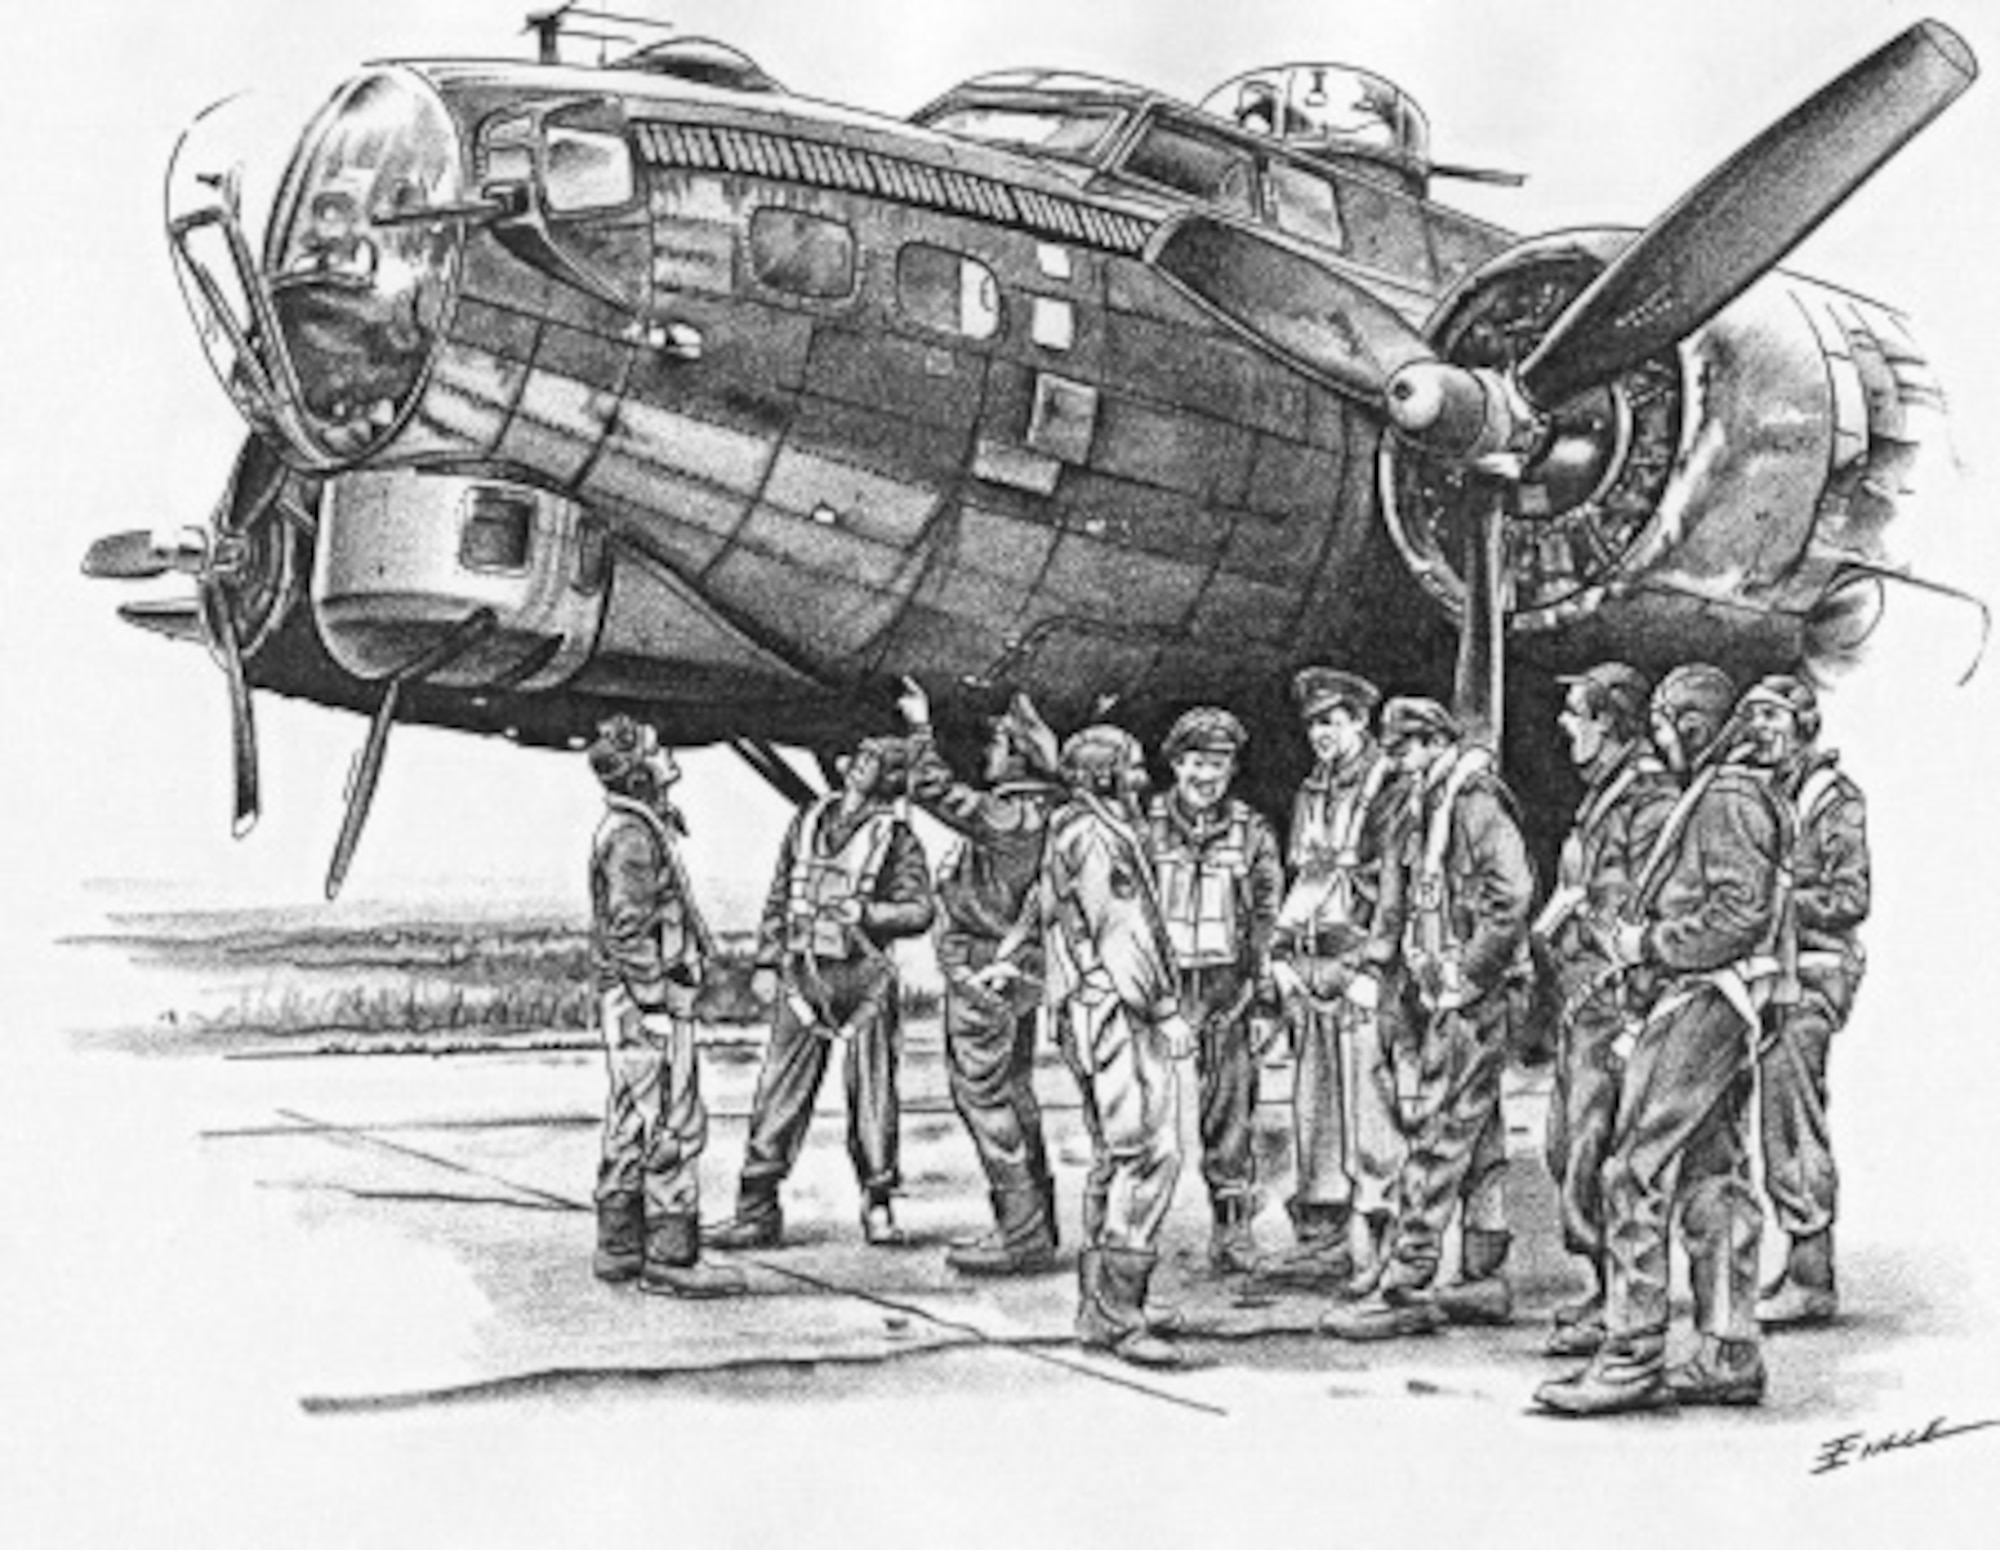 B-17 Flying Fortress and crew (b/w), Illustration by Bob Engle